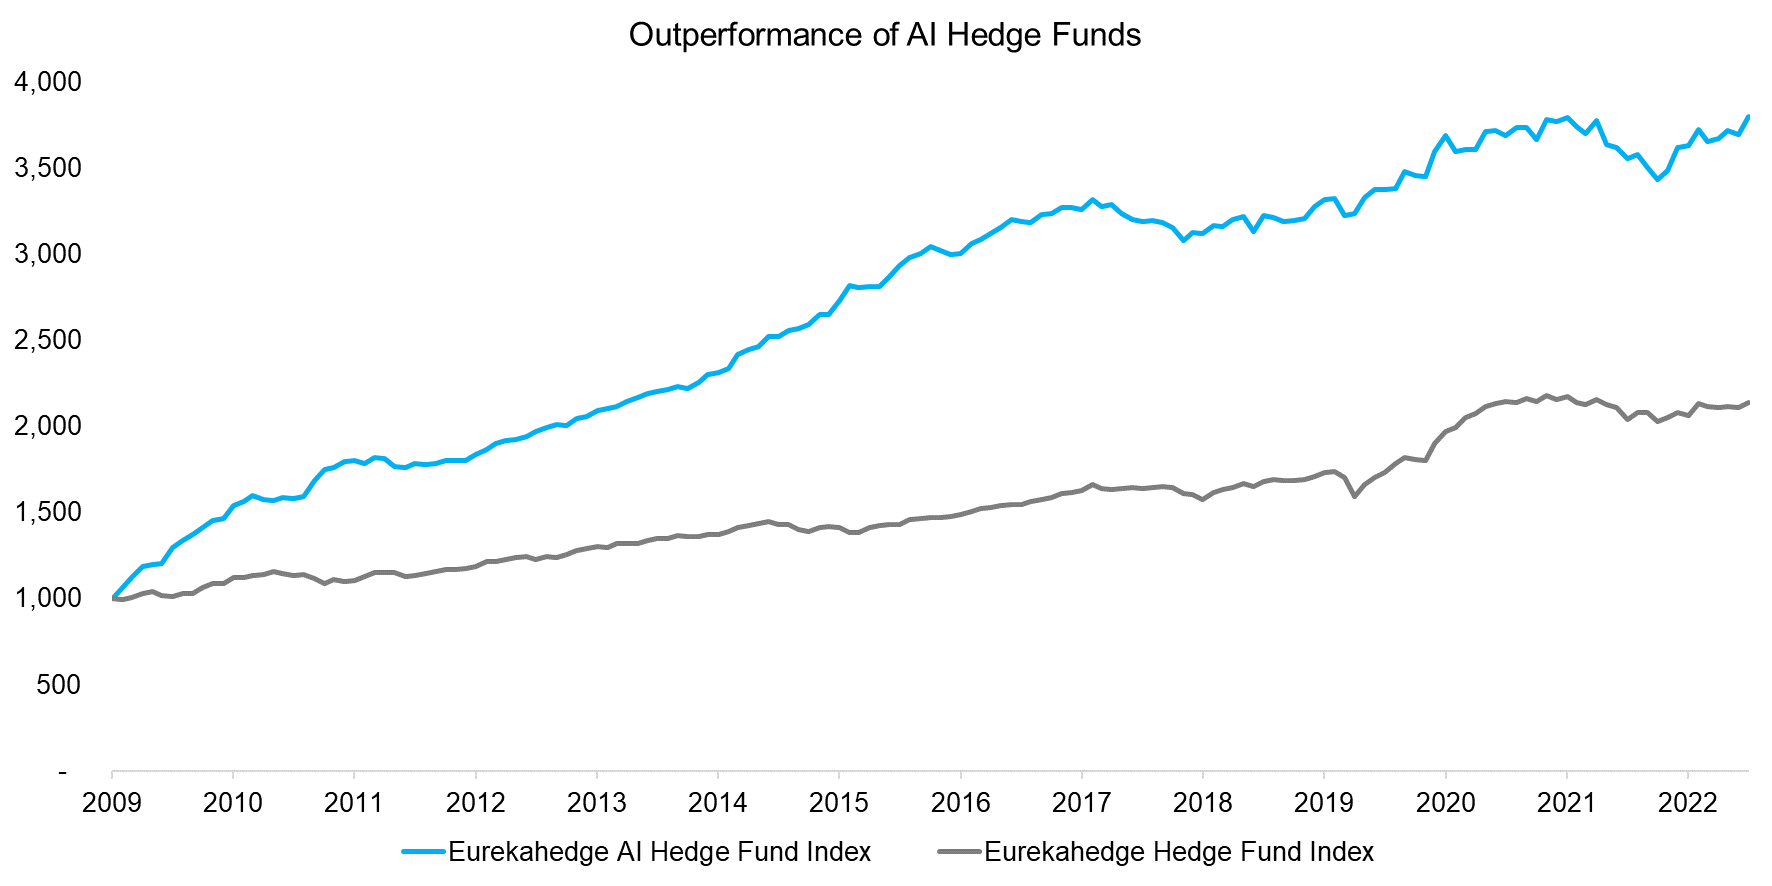 Outperformance of AI Hedge Funds